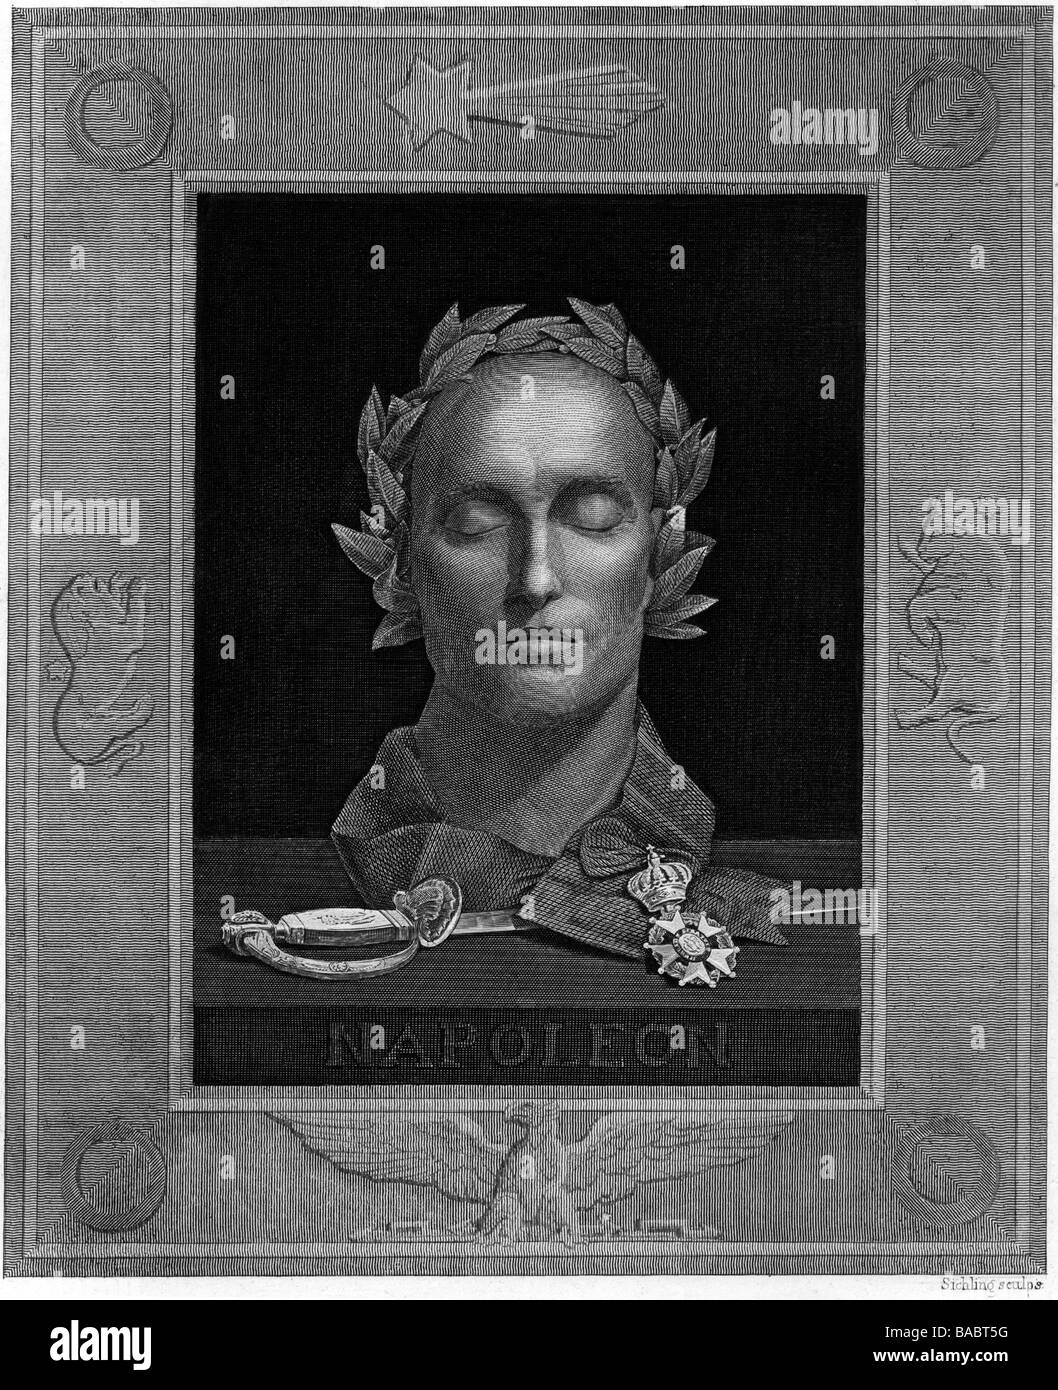 Napoleon I, 15.8.1769 - 5.5. 1821, Emperor of the French 2.12.1804 - 22.6.1815, death mask, copper engraving by Lazarus Gottlieb Sichling (1812 - 1863), , Artist's Copyright has not to be cleared Stock Photo